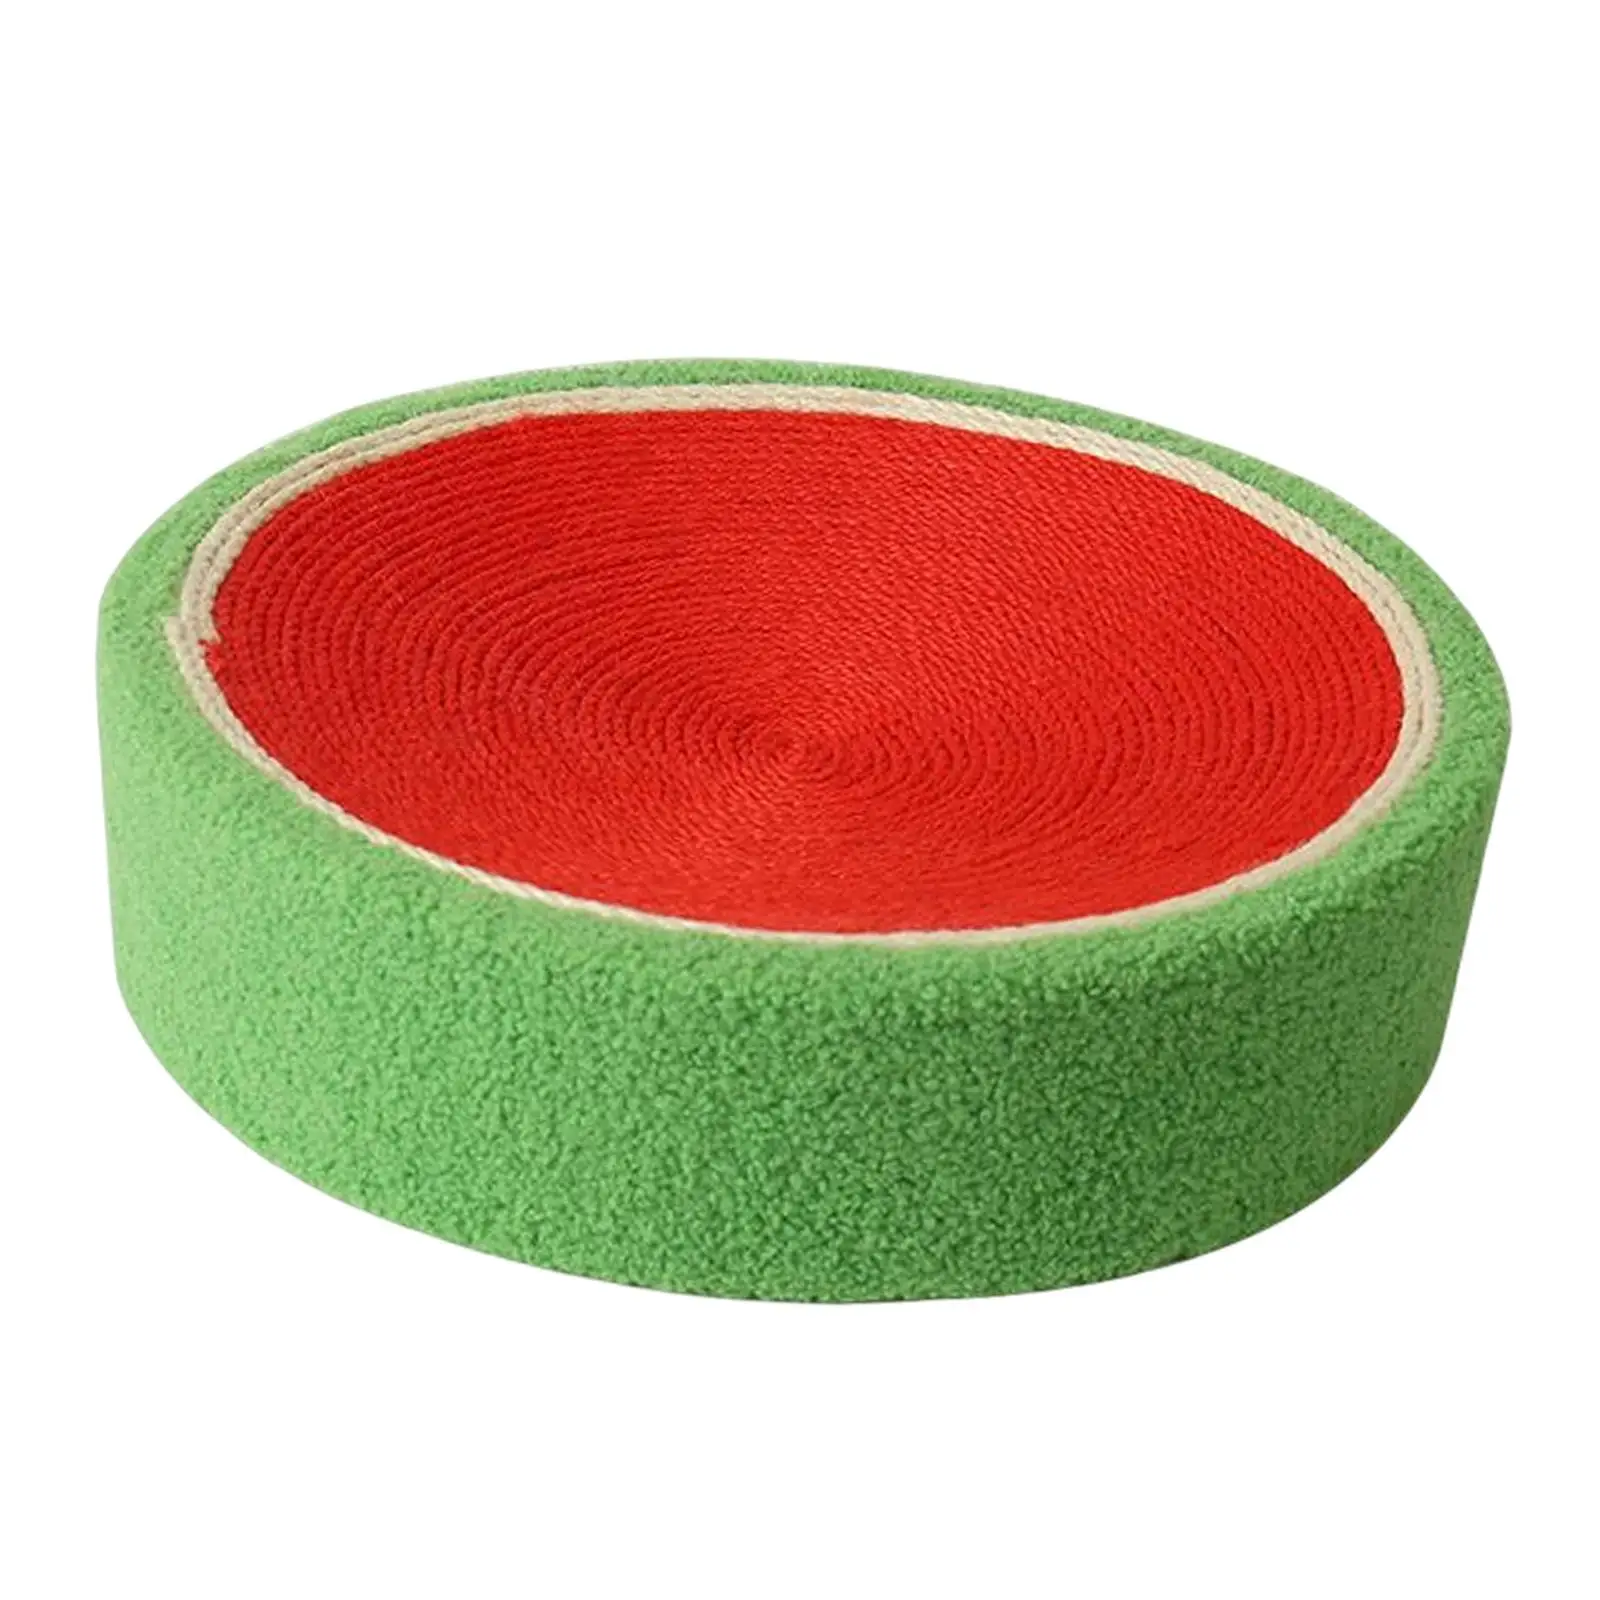 Cat Scratcher Bowl Round Scratch Pad Nonslip Bottom for Furniture Protection Cat Kitty Training Toy Indoor Cats Pet Cat Supplies